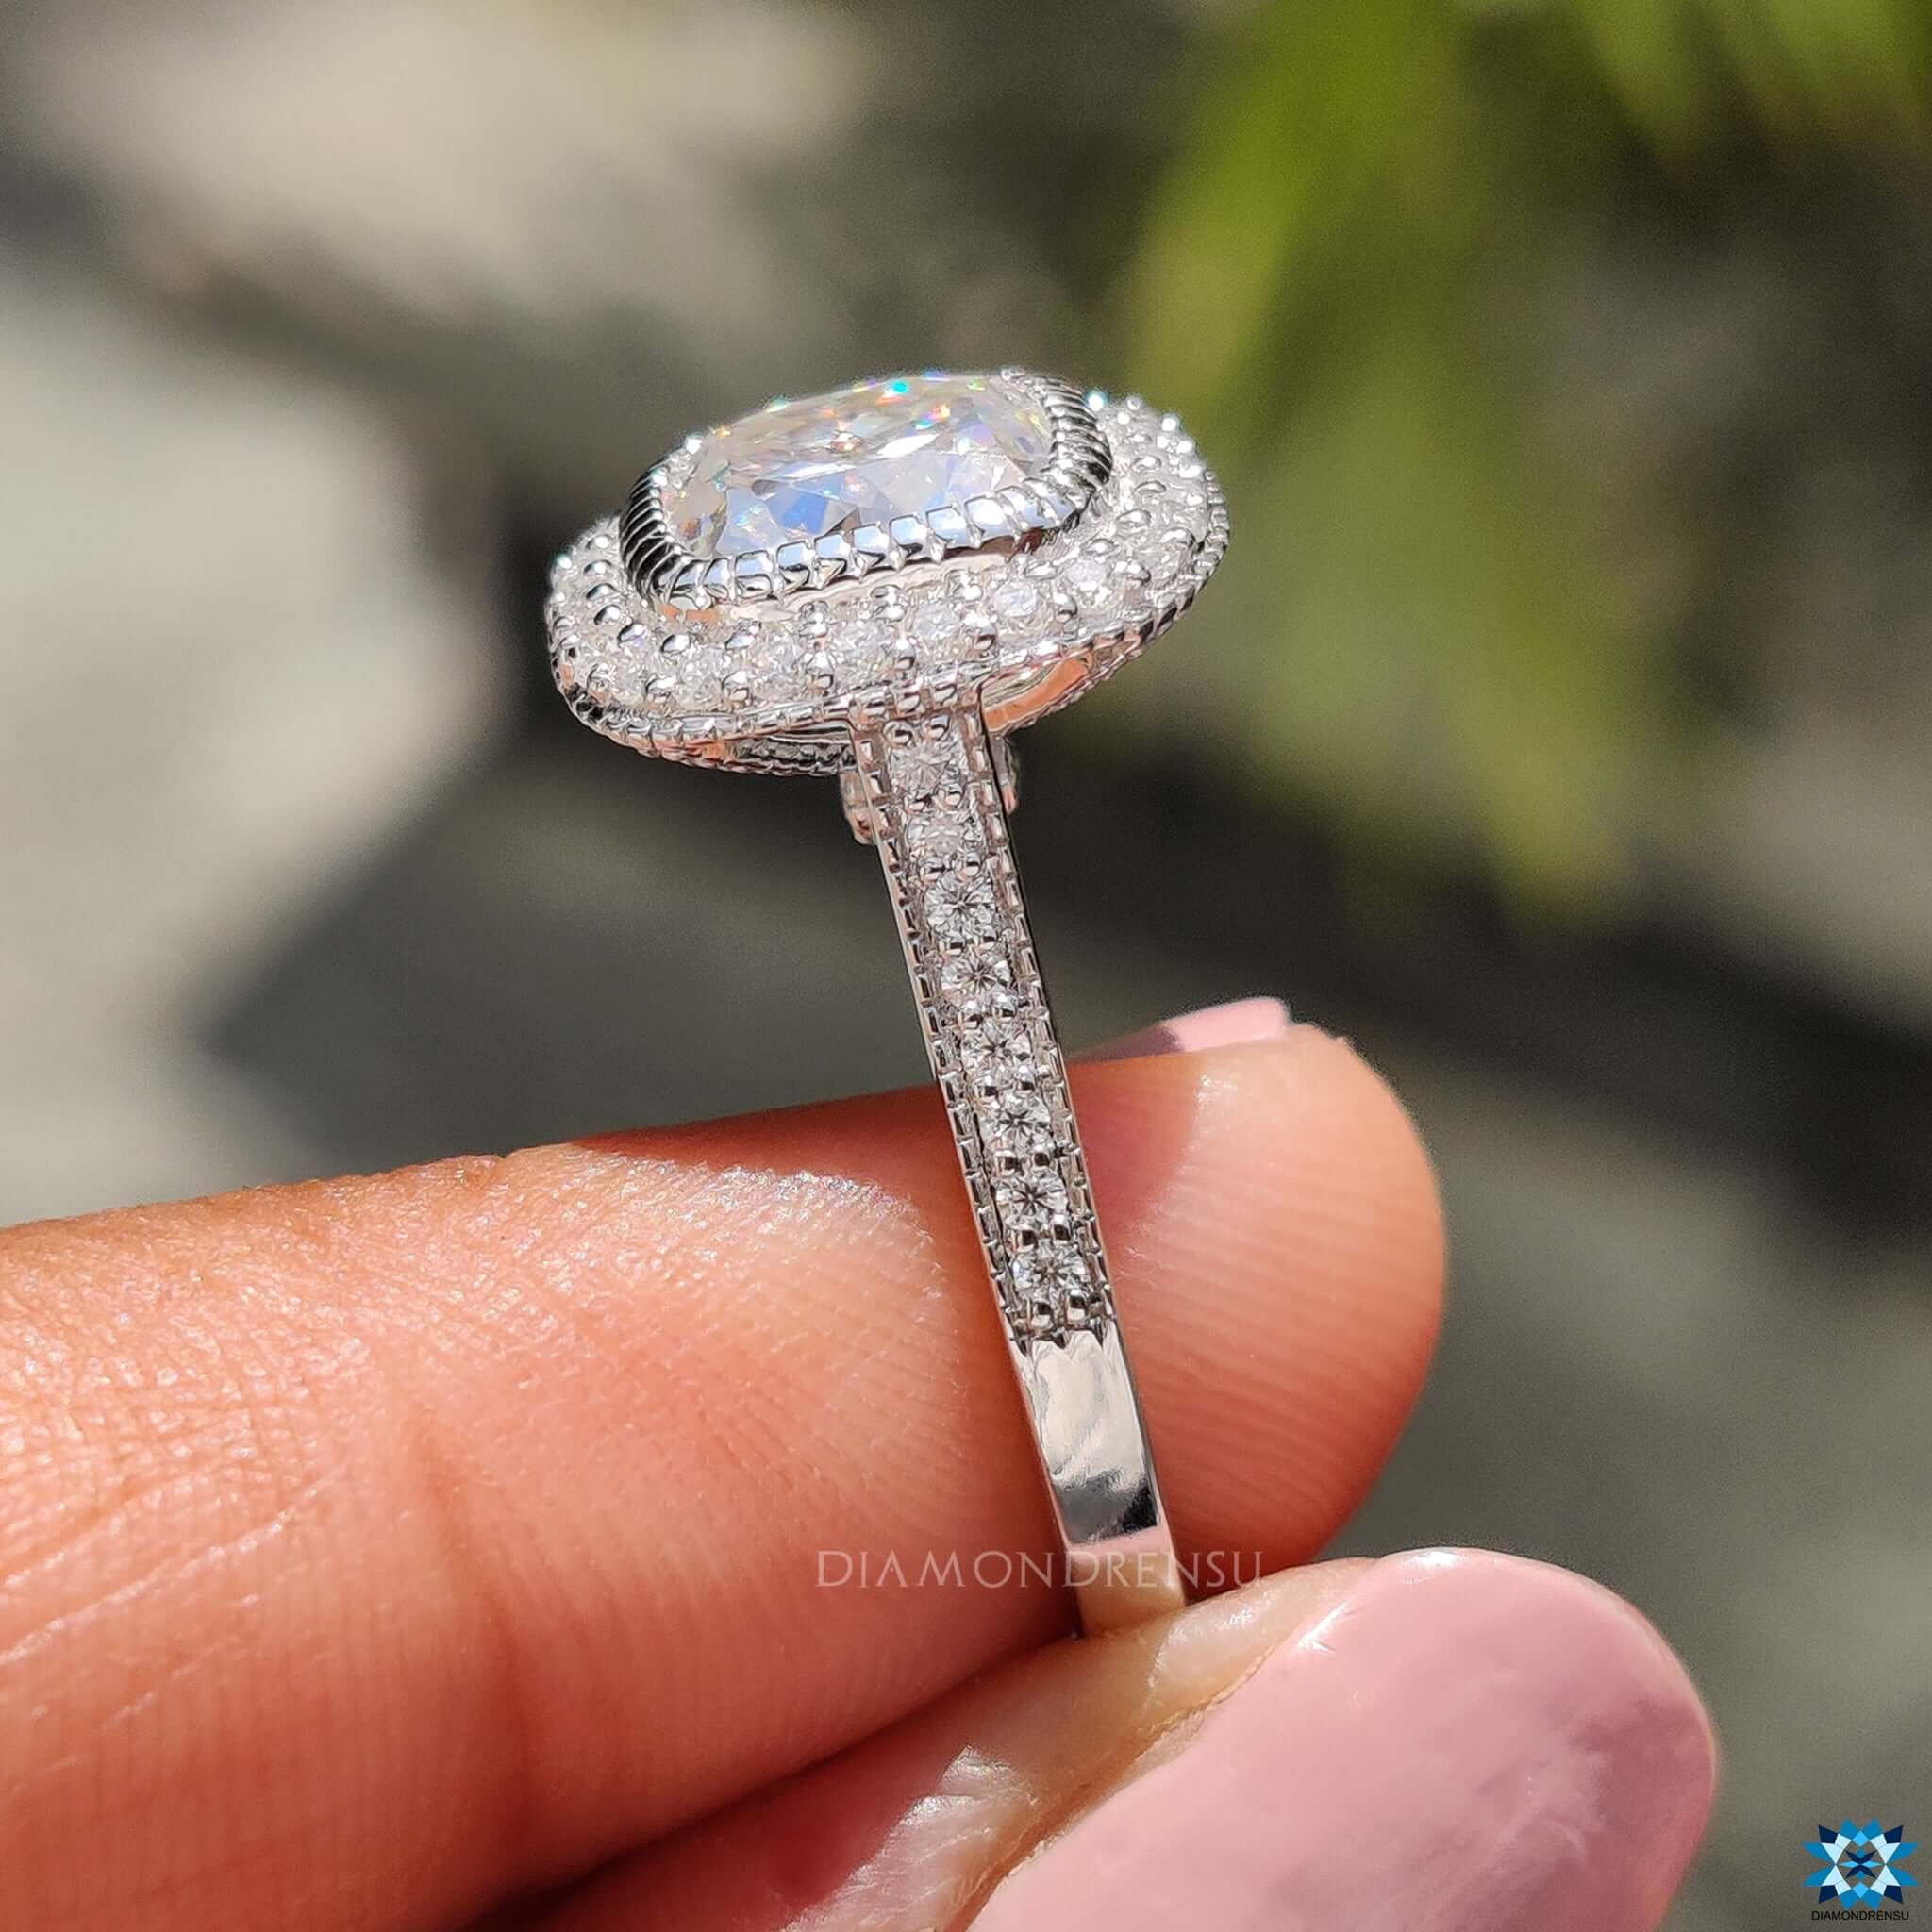 vintage style engagement ring